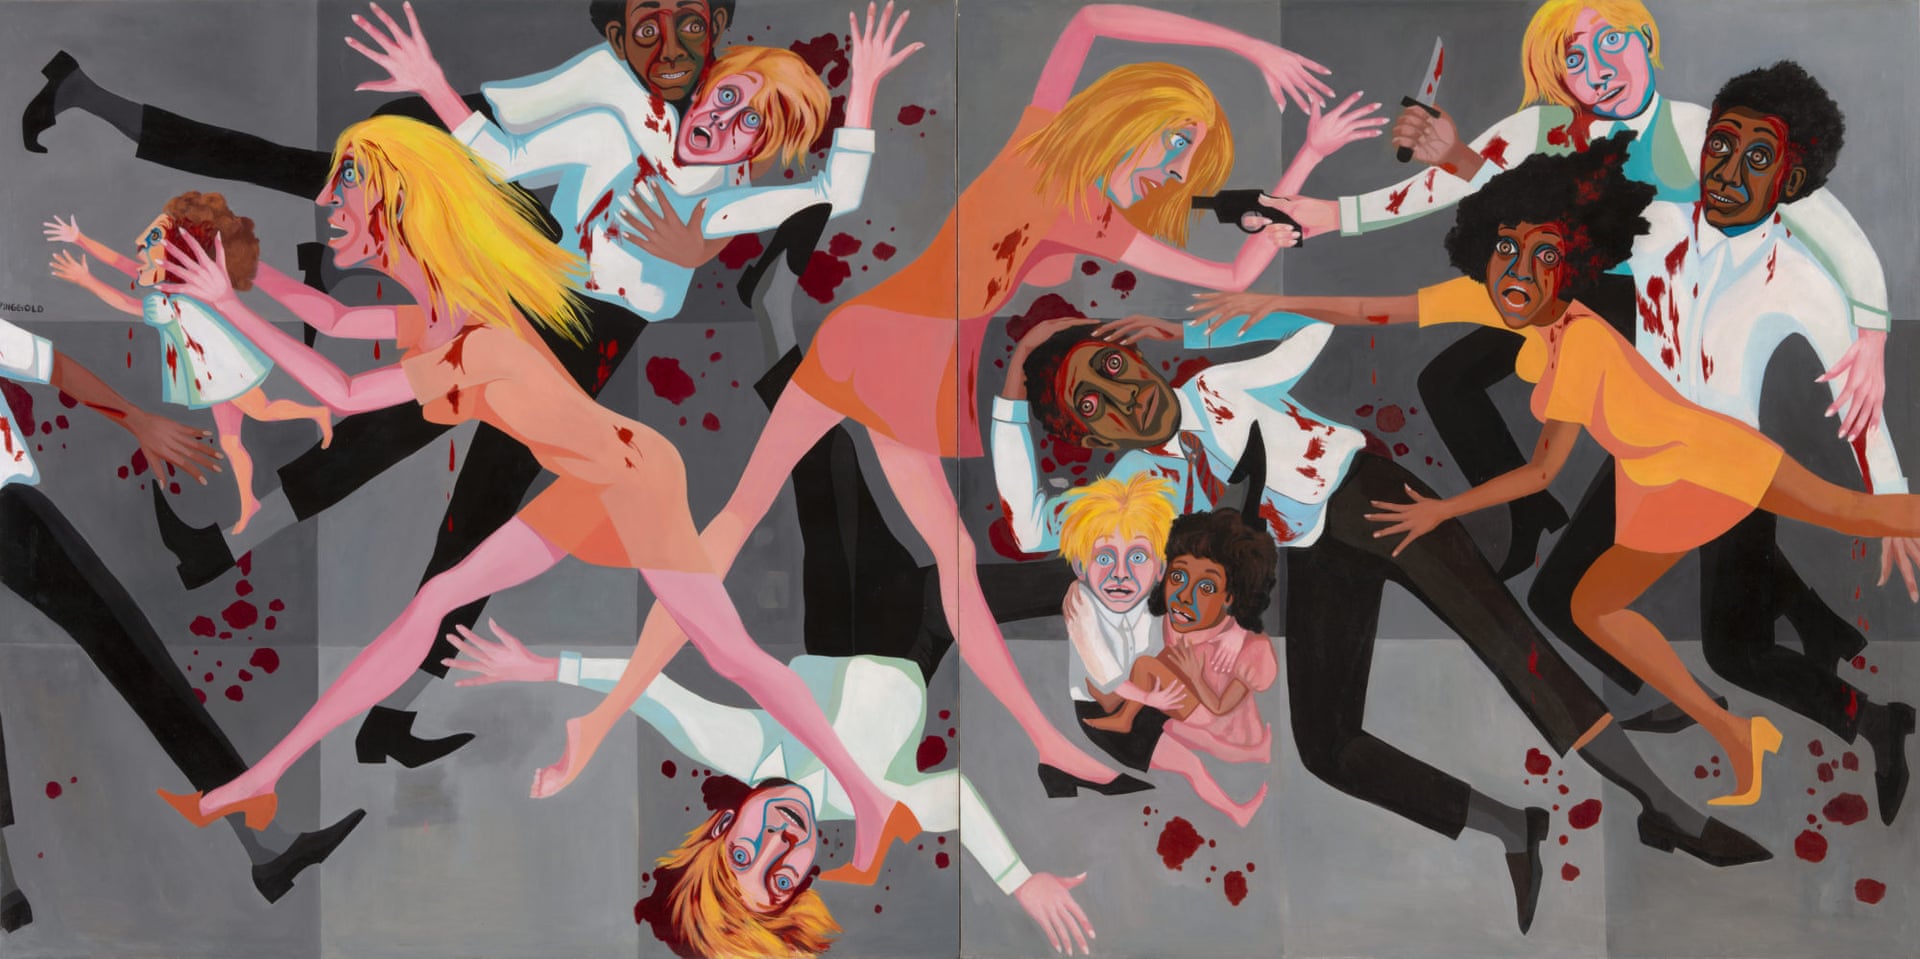 Blood in the streets … American People
                          Series #20 Die, 1967 Faith Ringgold